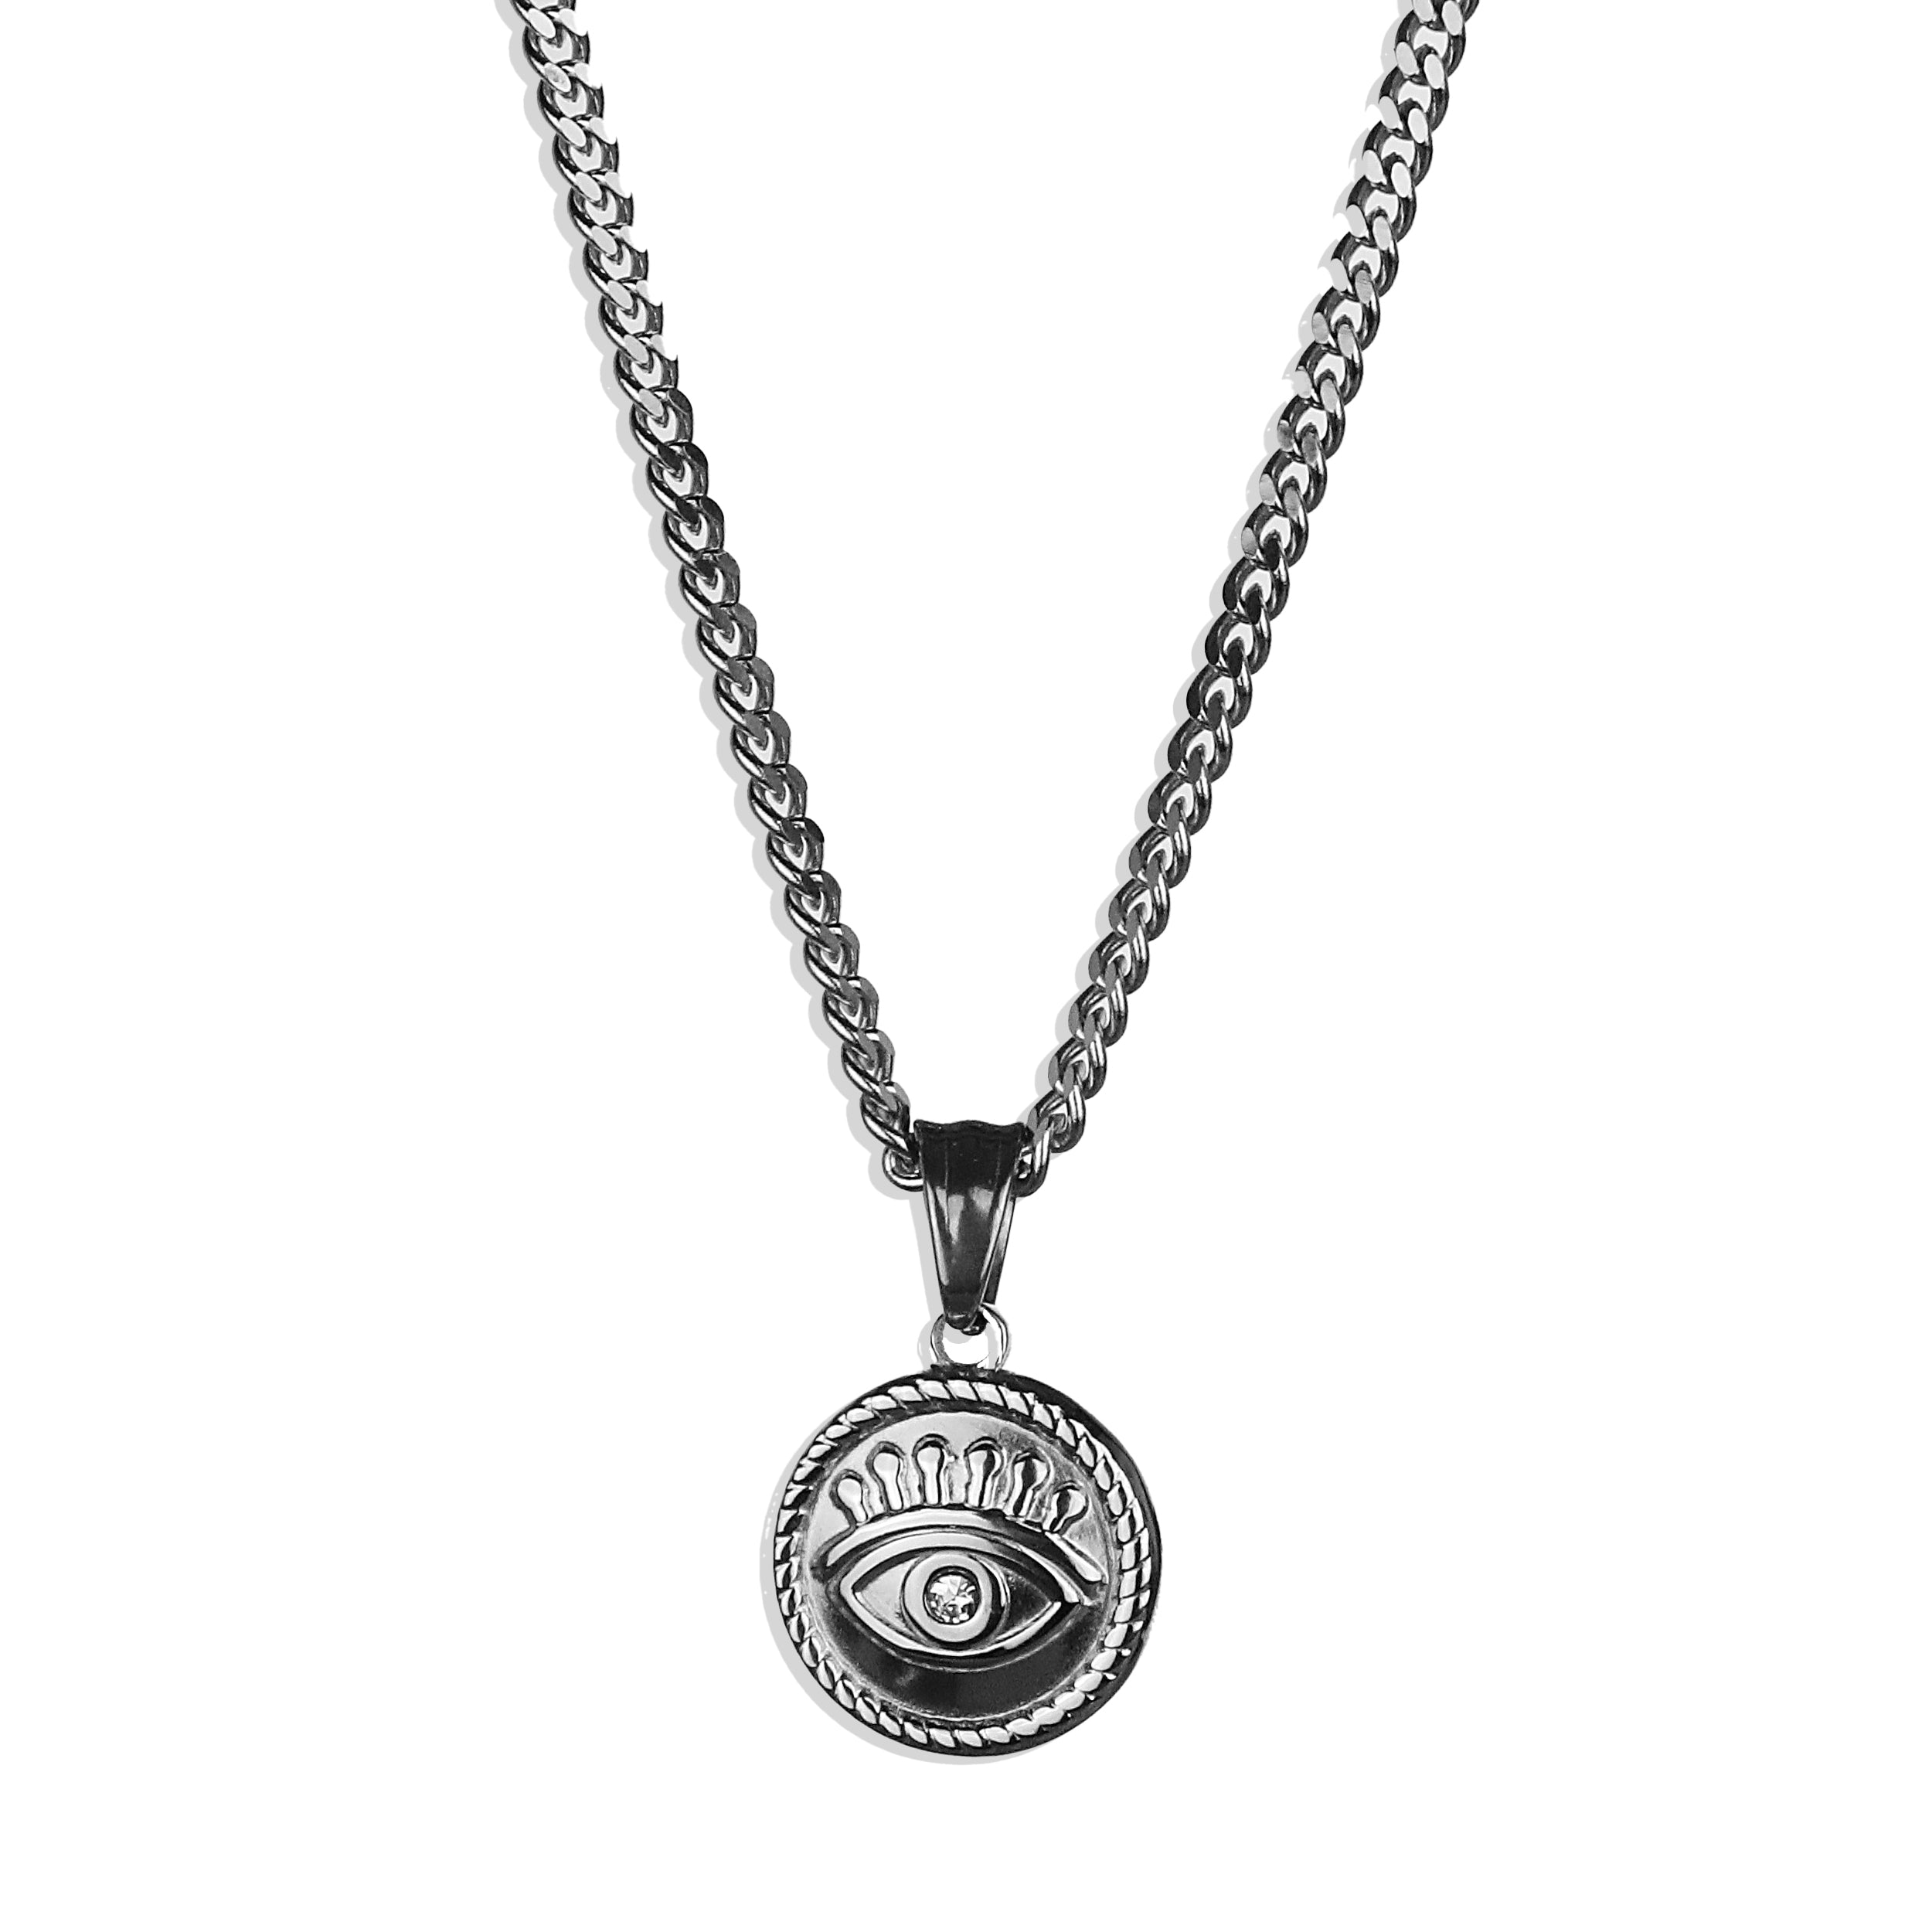 Protection Amulet Necklace - Silver